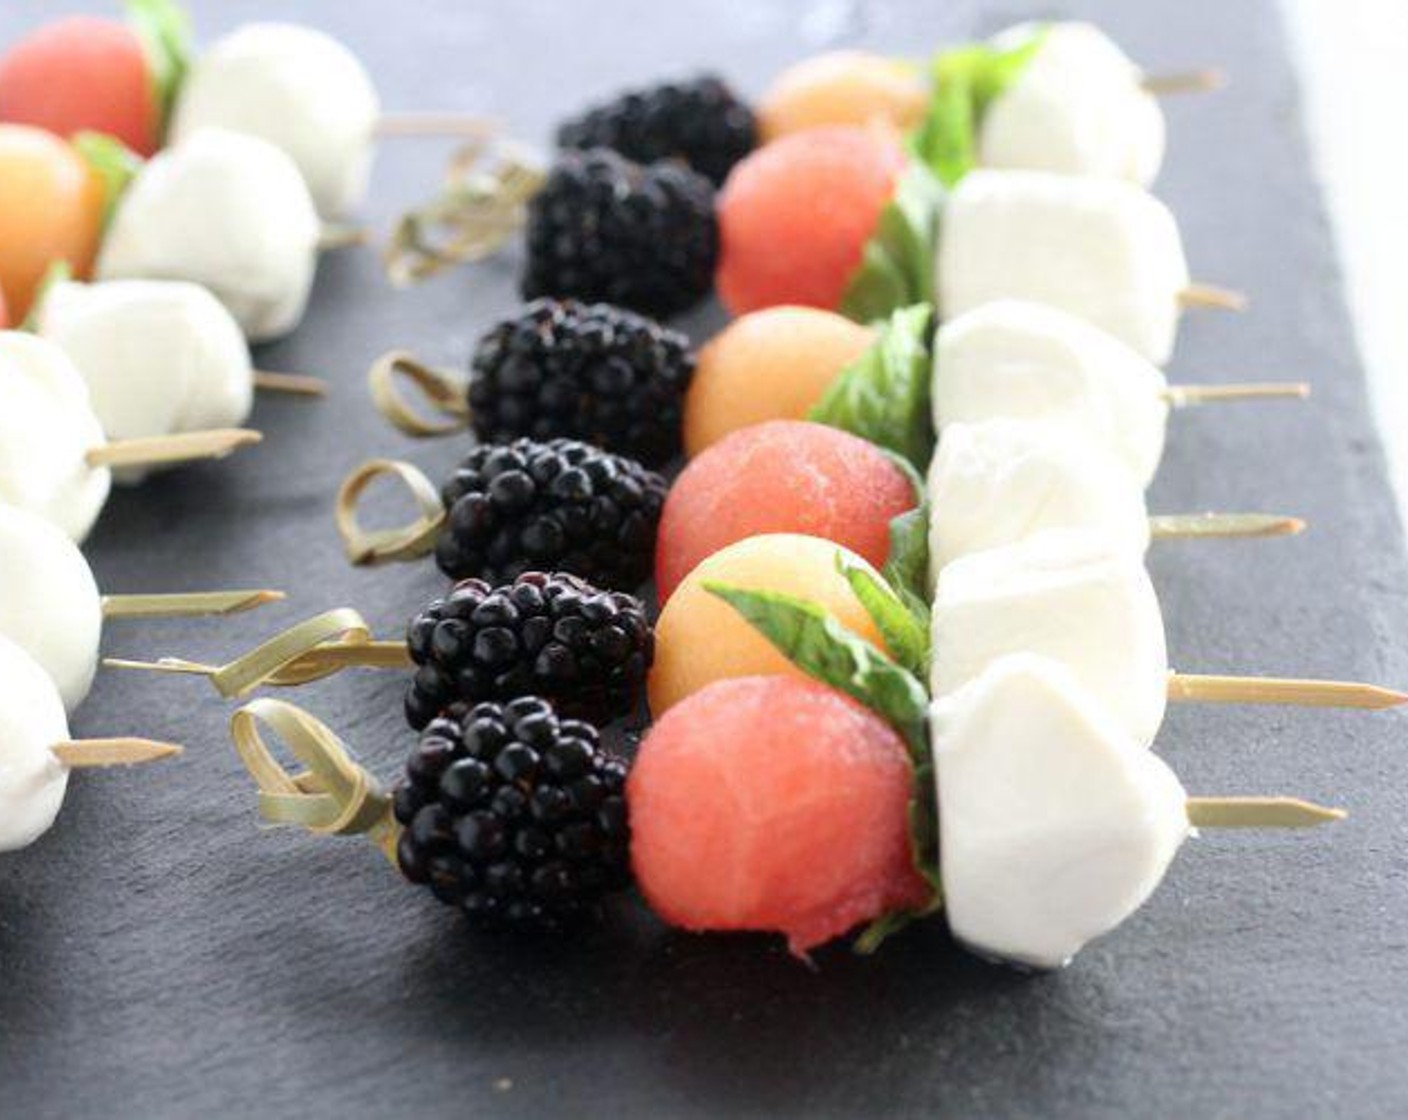 step 2 Assemble each pick with 1 Fresh Blackberry (1 cup), 1 melon ball, 1 Fresh Basil Leaf (1/2 cup), and 1 Fresh Mozzarella Cheese Ball (1 1/2 cups). Serve and enjoy!